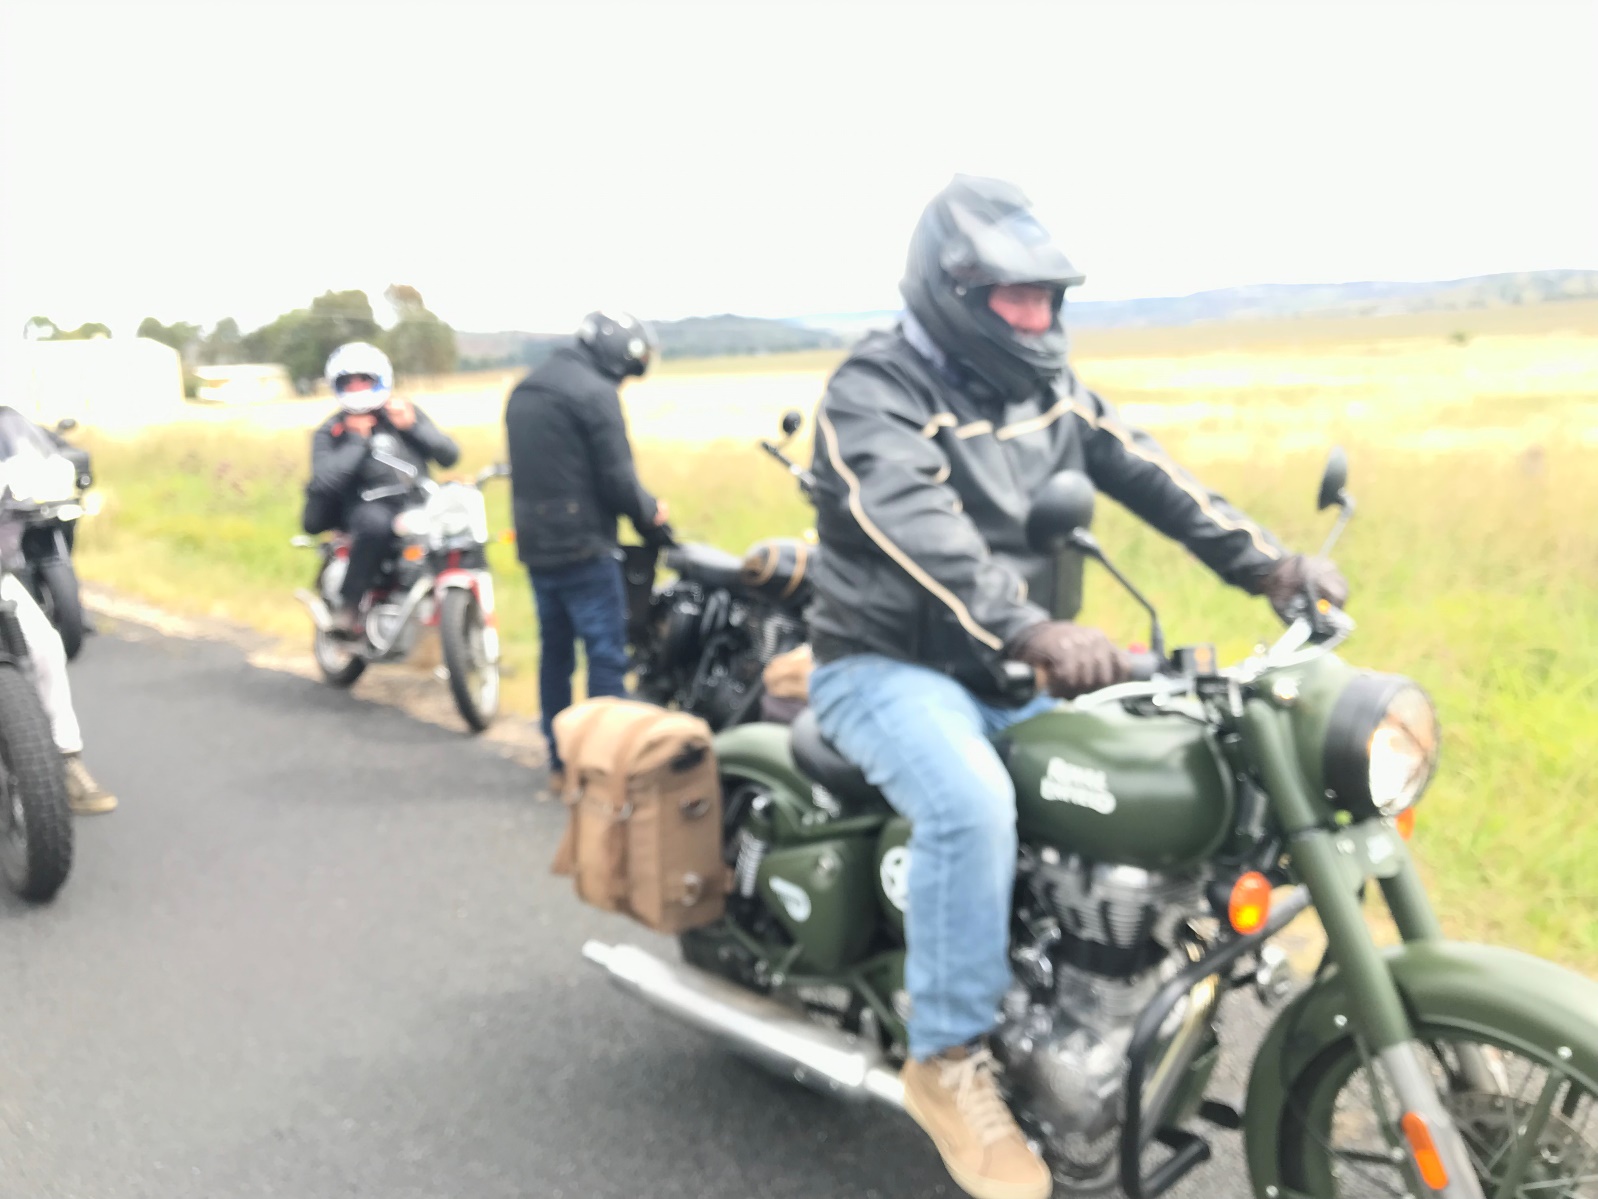 A group of people riding motorcycles

Description automatically generated with low confidence